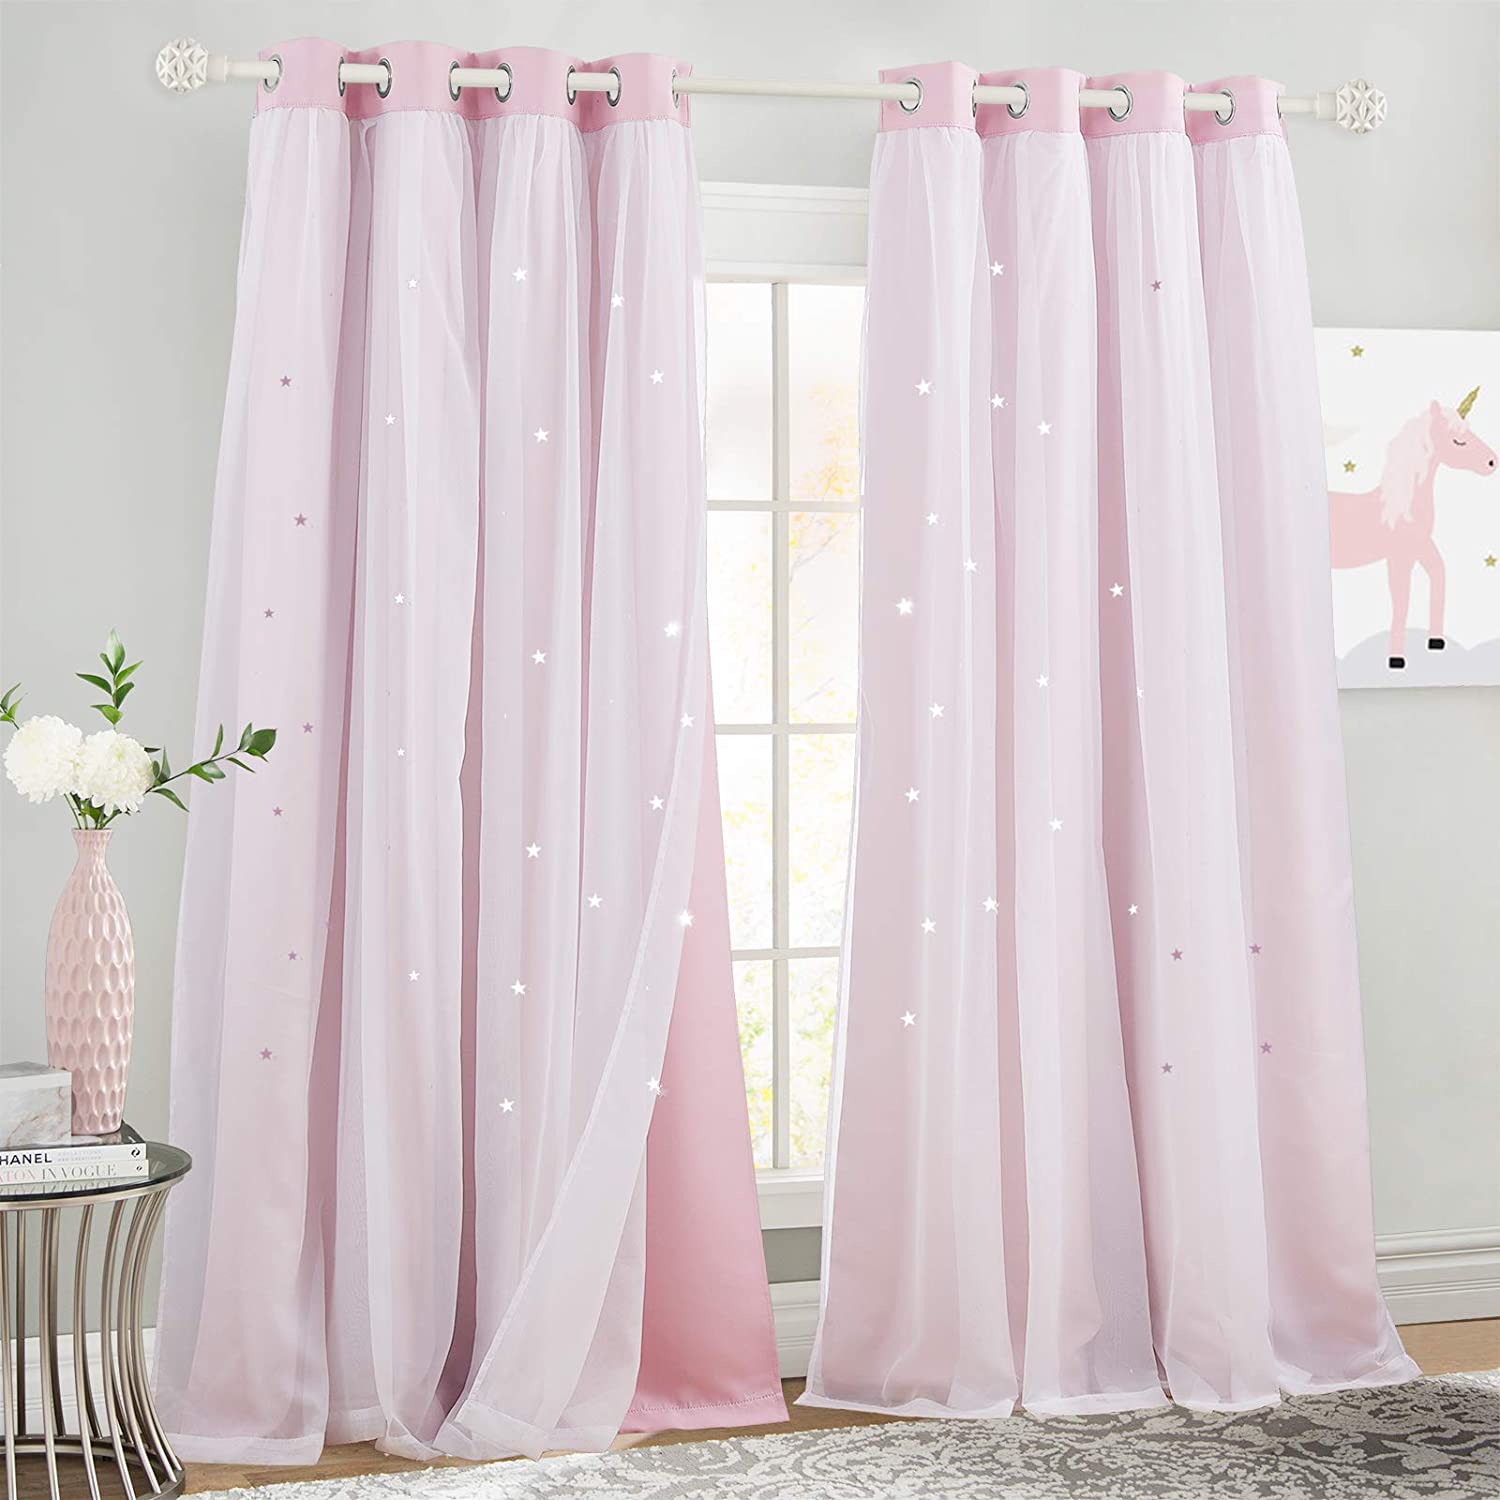 Blackout Rainbow And Star Cut Out Curtains With Sheer Curtain Overlay 2 Panels KGORGE Store